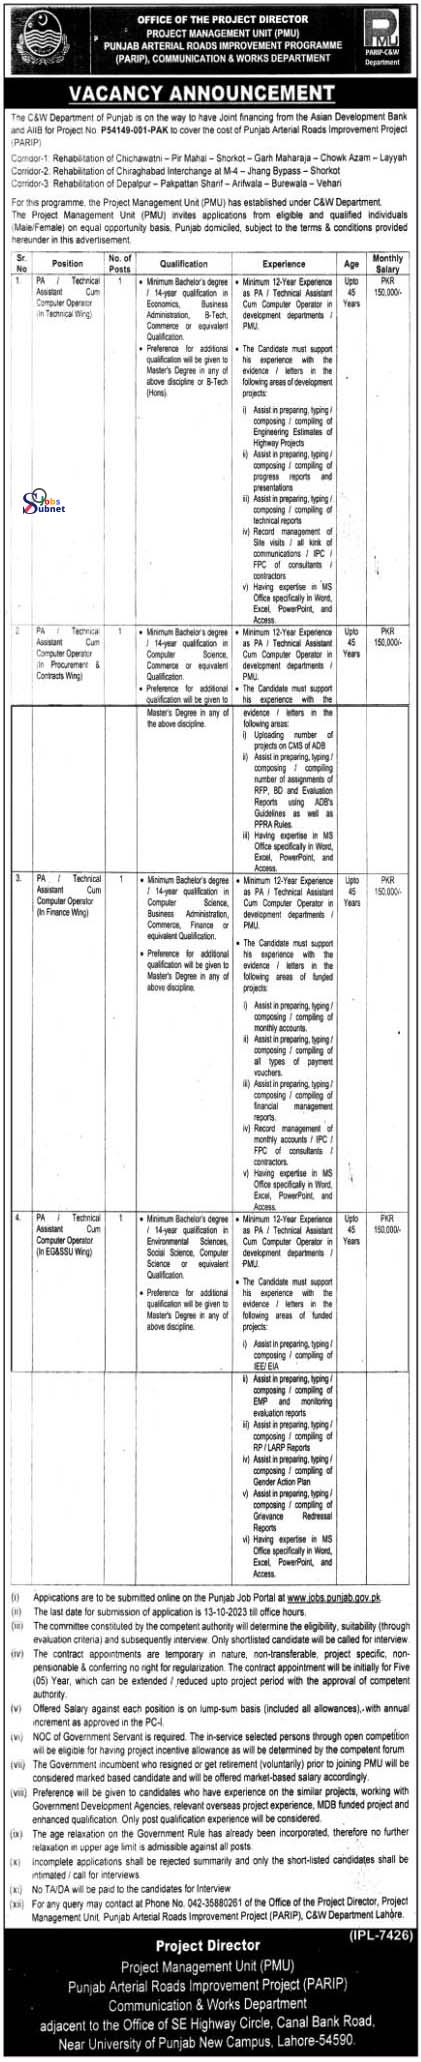 Position Vacant At Communication & Works Department